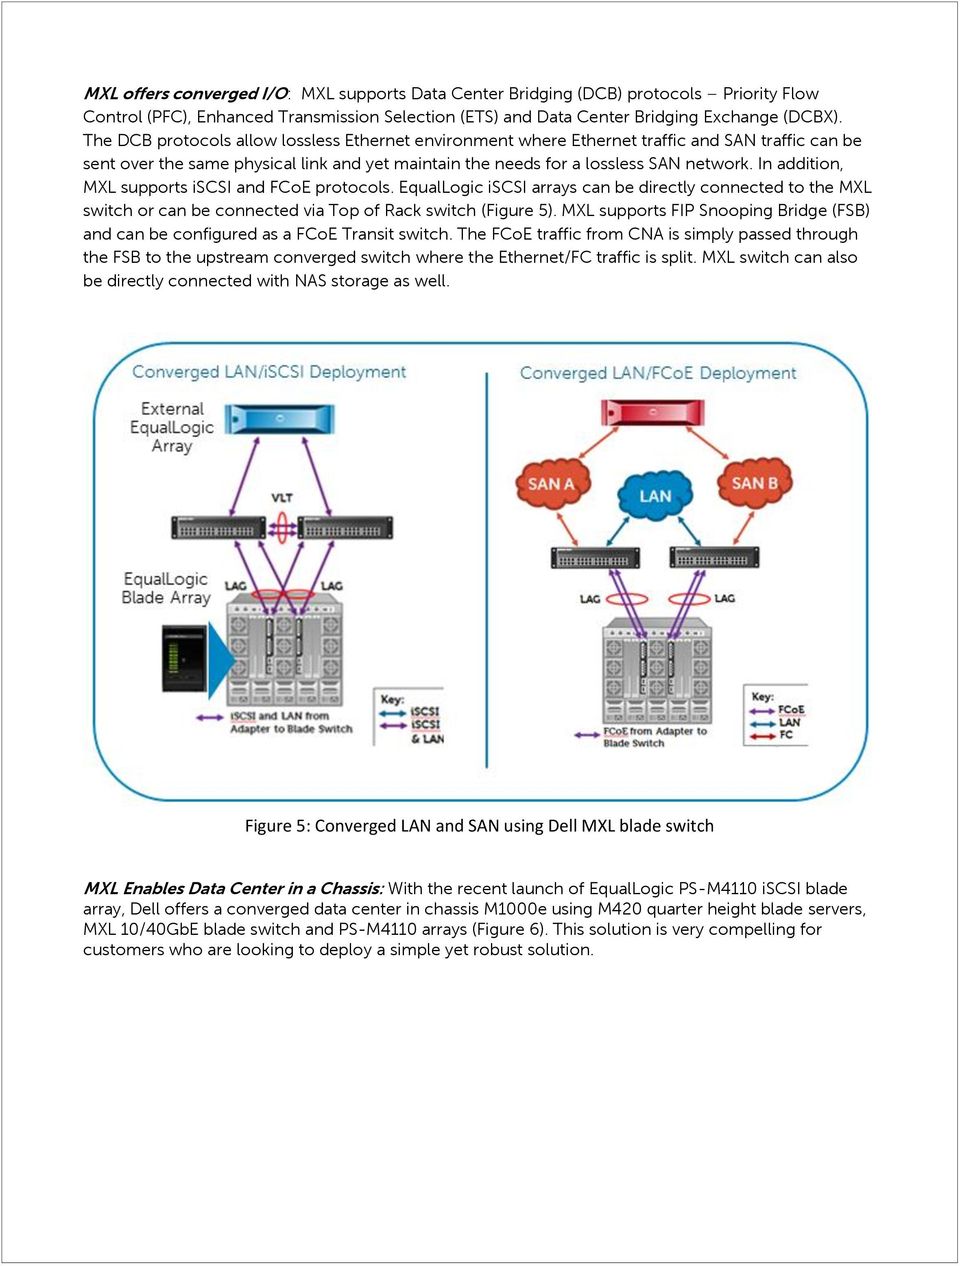 In addition, MXL supports iscsi and FCoE protocols. EqualLogic iscsi arrays can be directly connected to the MXL switch or can be connected via Top of Rack switch (Figure 5).